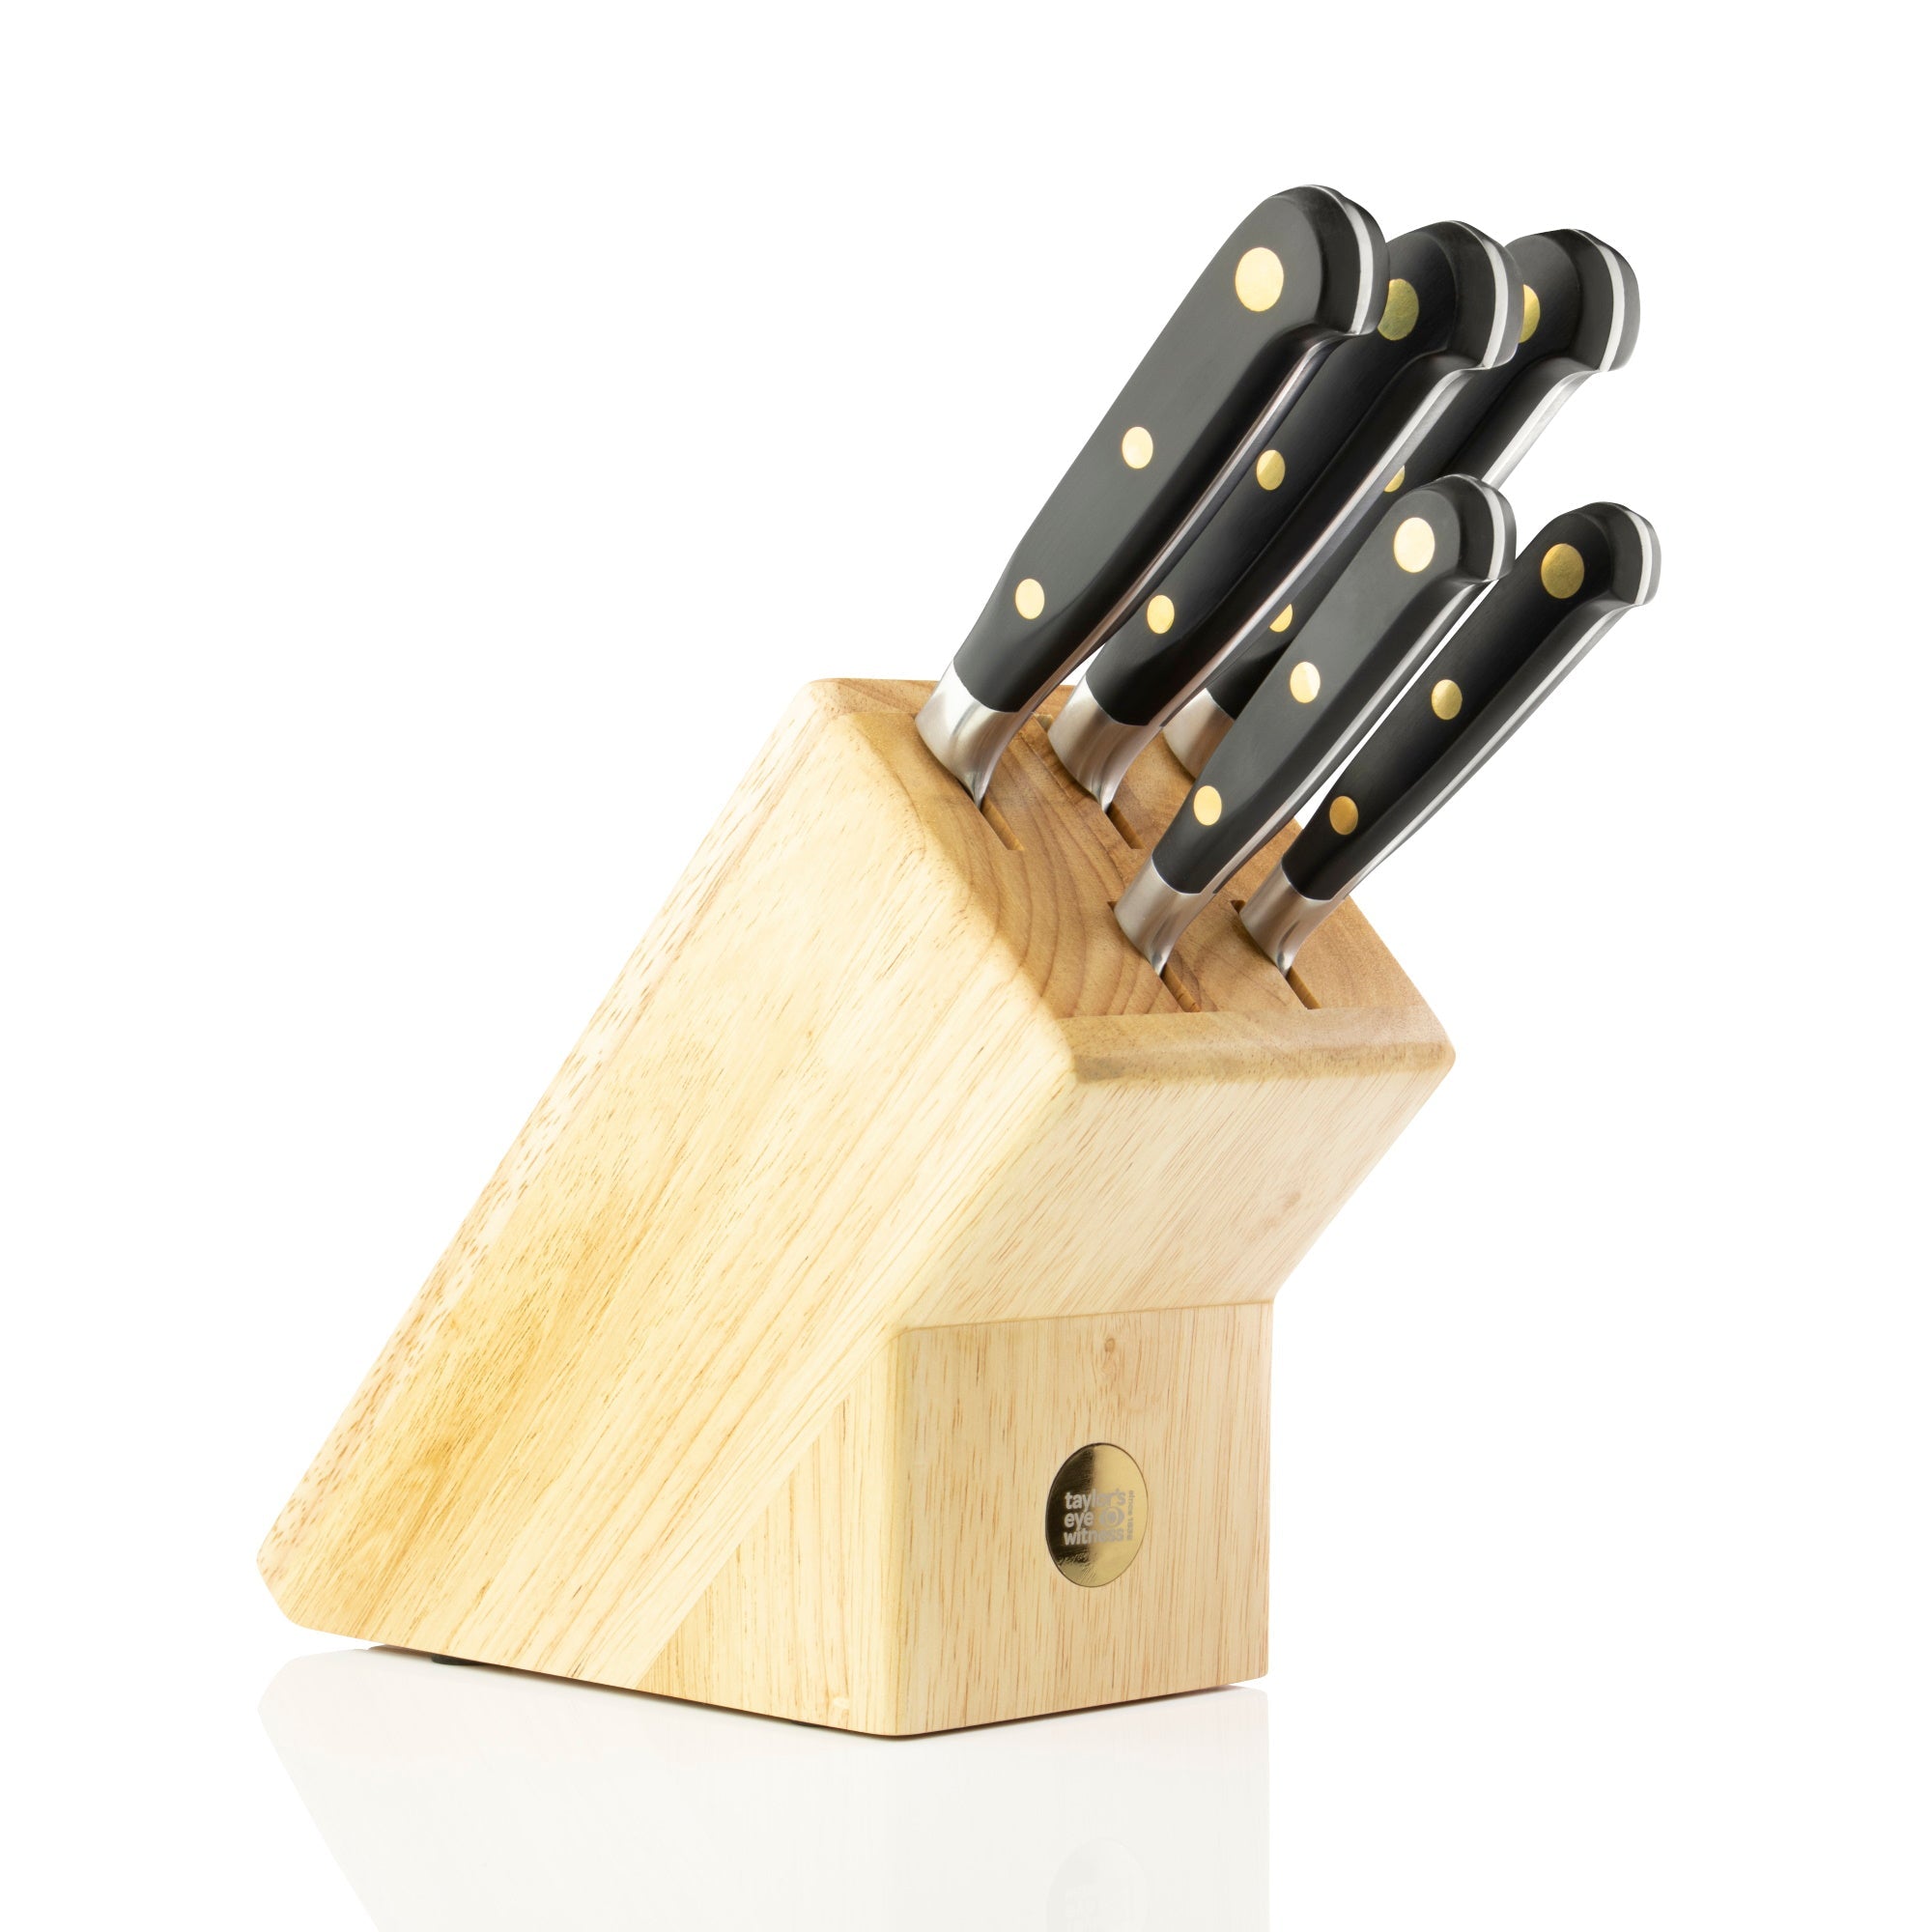 Taylors Eye Witness Oxford LCK10KB01 5Pce Knife Set with Wooden Block - Premium NOT GOOGLE from Taylors Eye Witness - Just $69.95! Shop now at W Hurst & Son (IW) Ltd